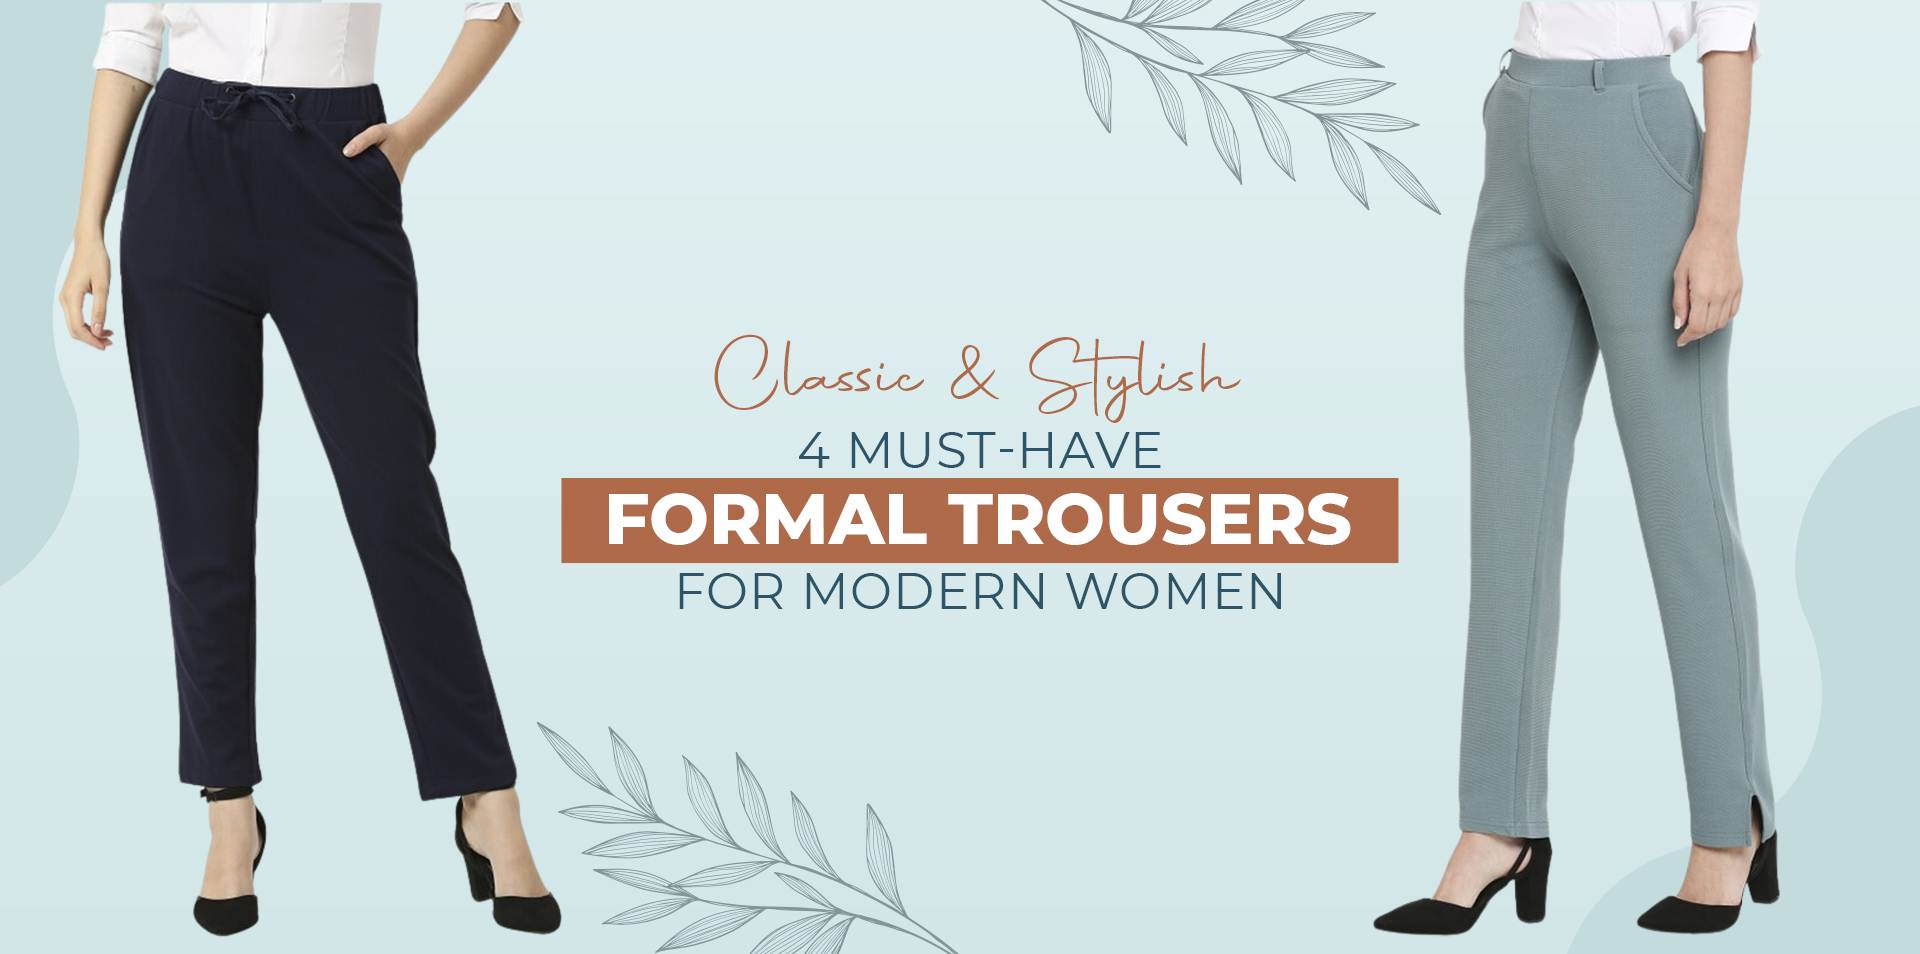 Classic & Stylish: 4 Must-Have Formal Trousers for Modern Women and Girls | Smarty Pants